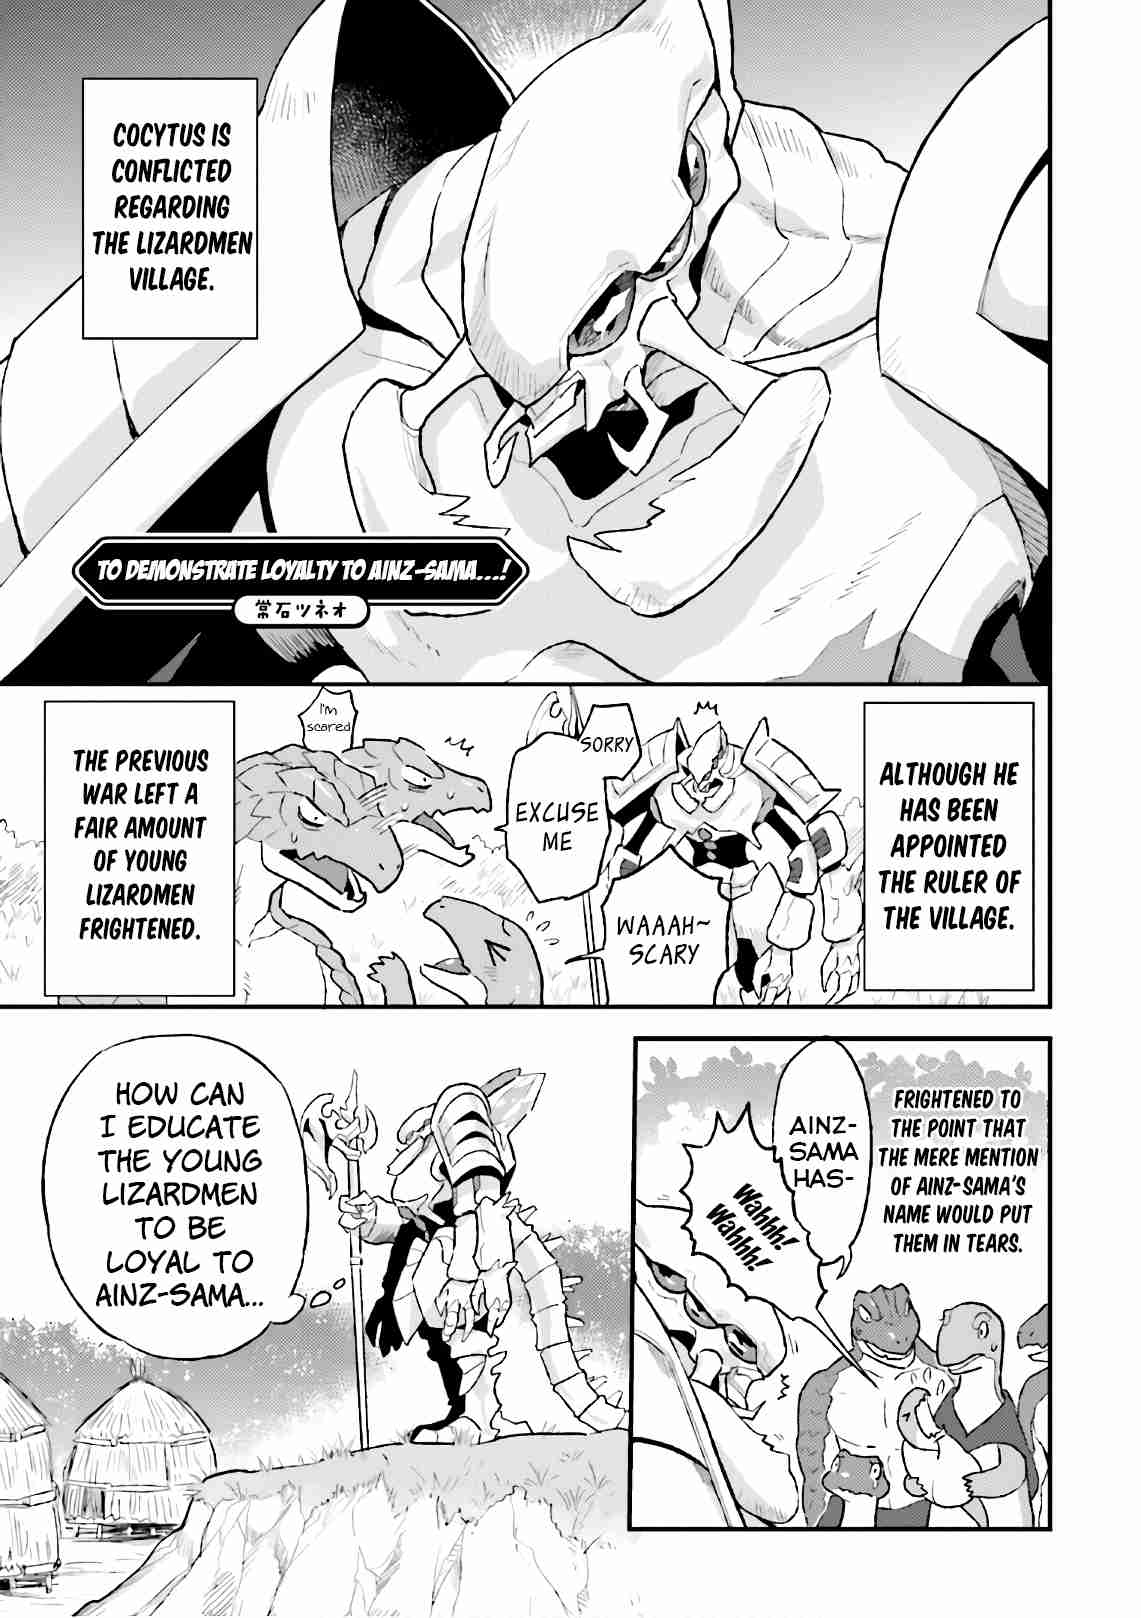 Overlord Official Comic A La Carte Vol. 3 Ch. 33 To demonstrate loyalty to Ainz sama...!